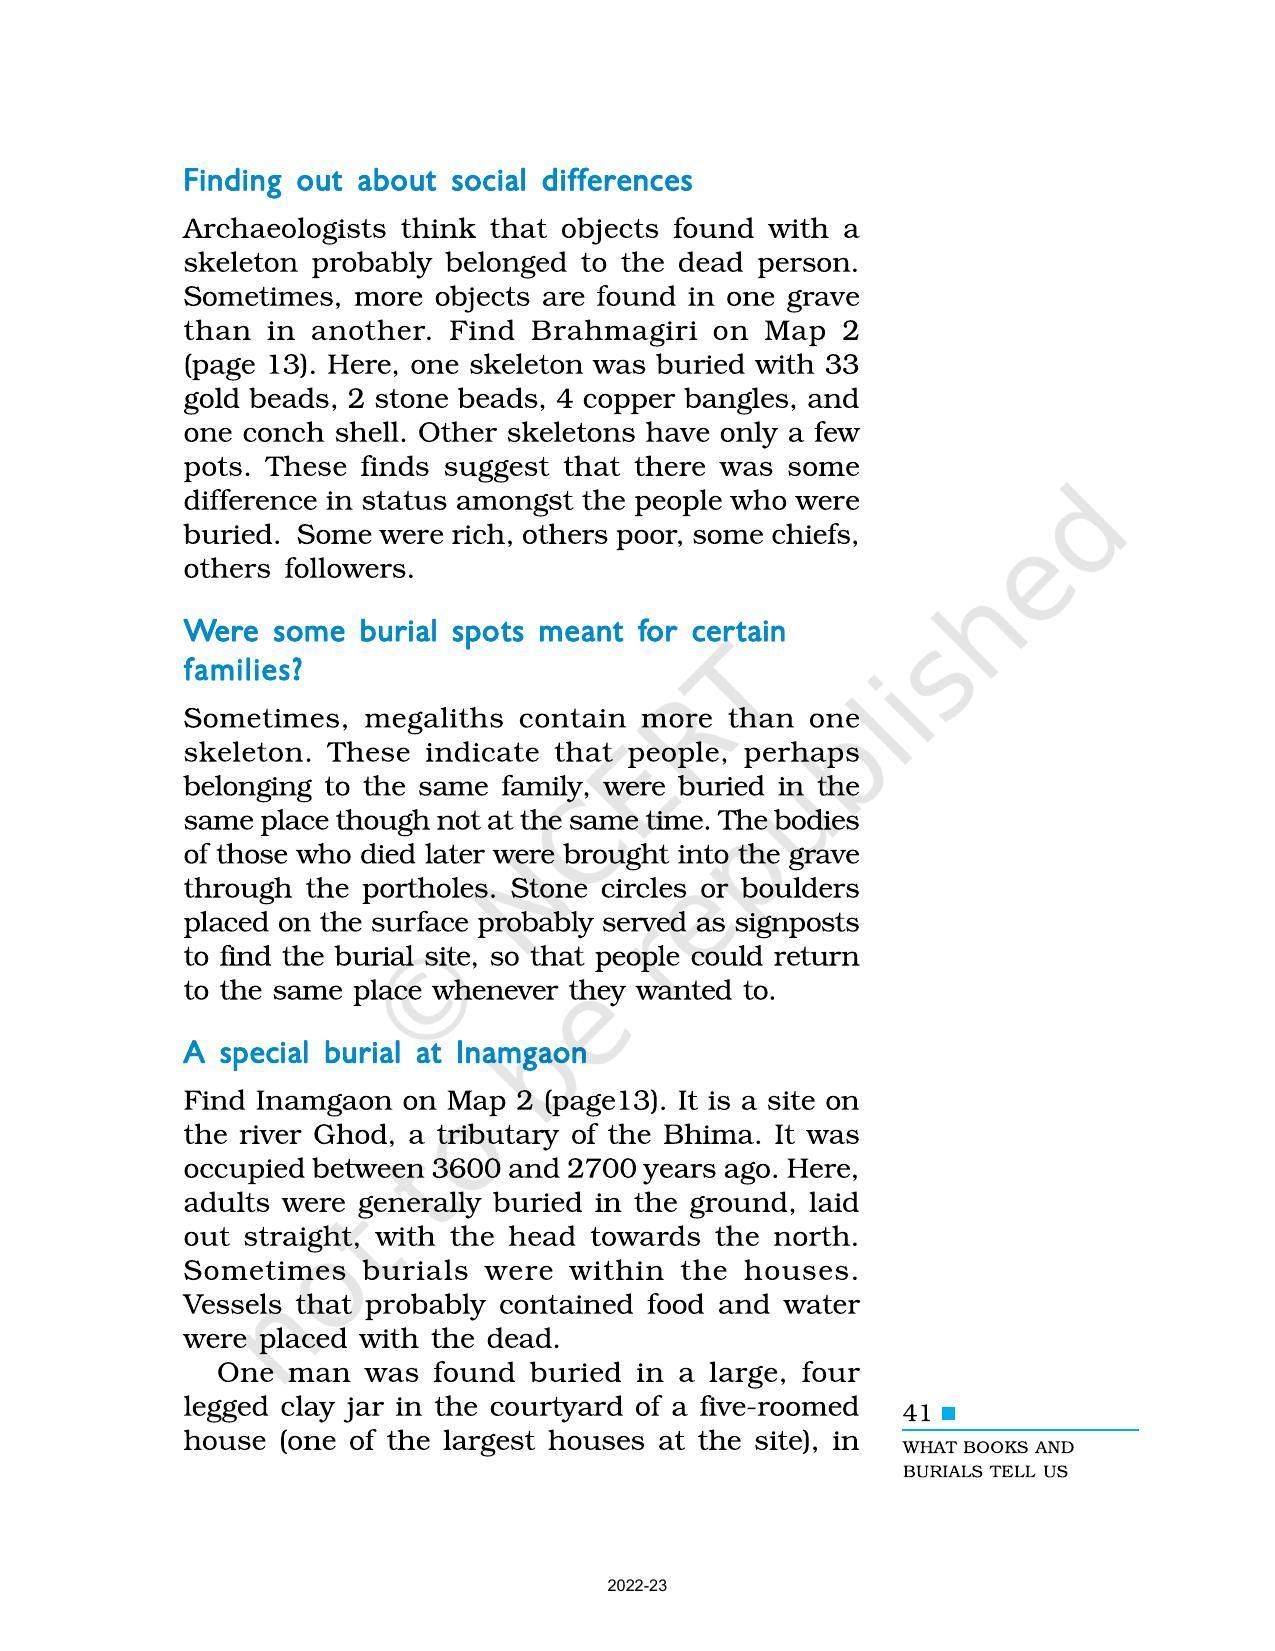 NCERT Book for Class 6 Social Science(History) : Chapter 4-What Books and Burials Tell Us - Page 7